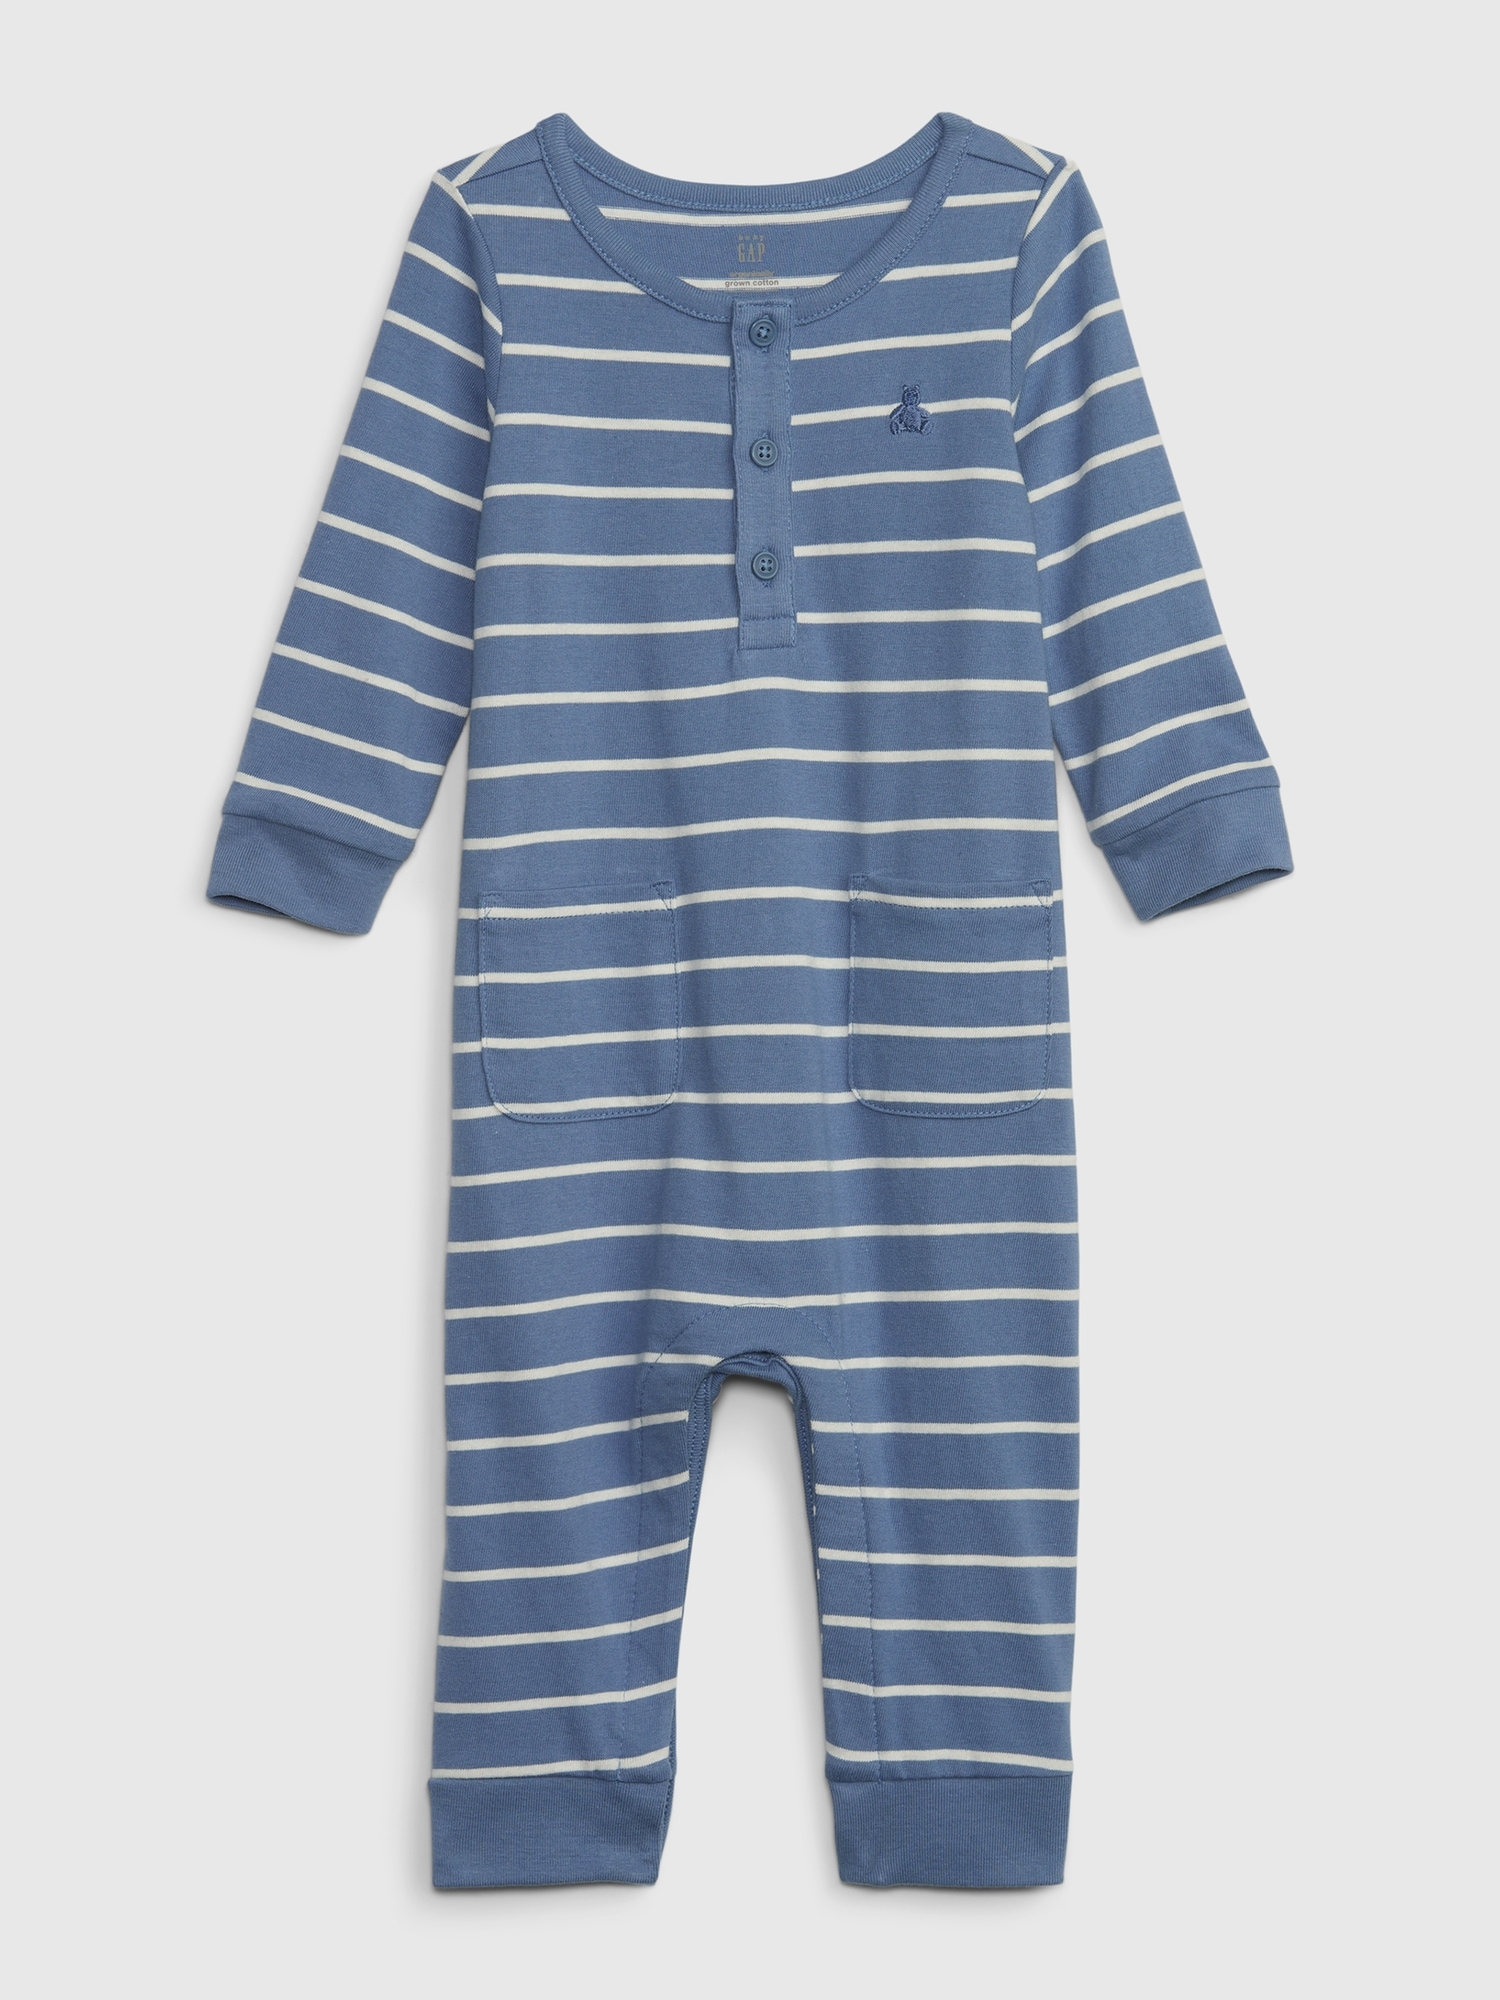 Baby First Favorites Organic CloudCotton One-Piece